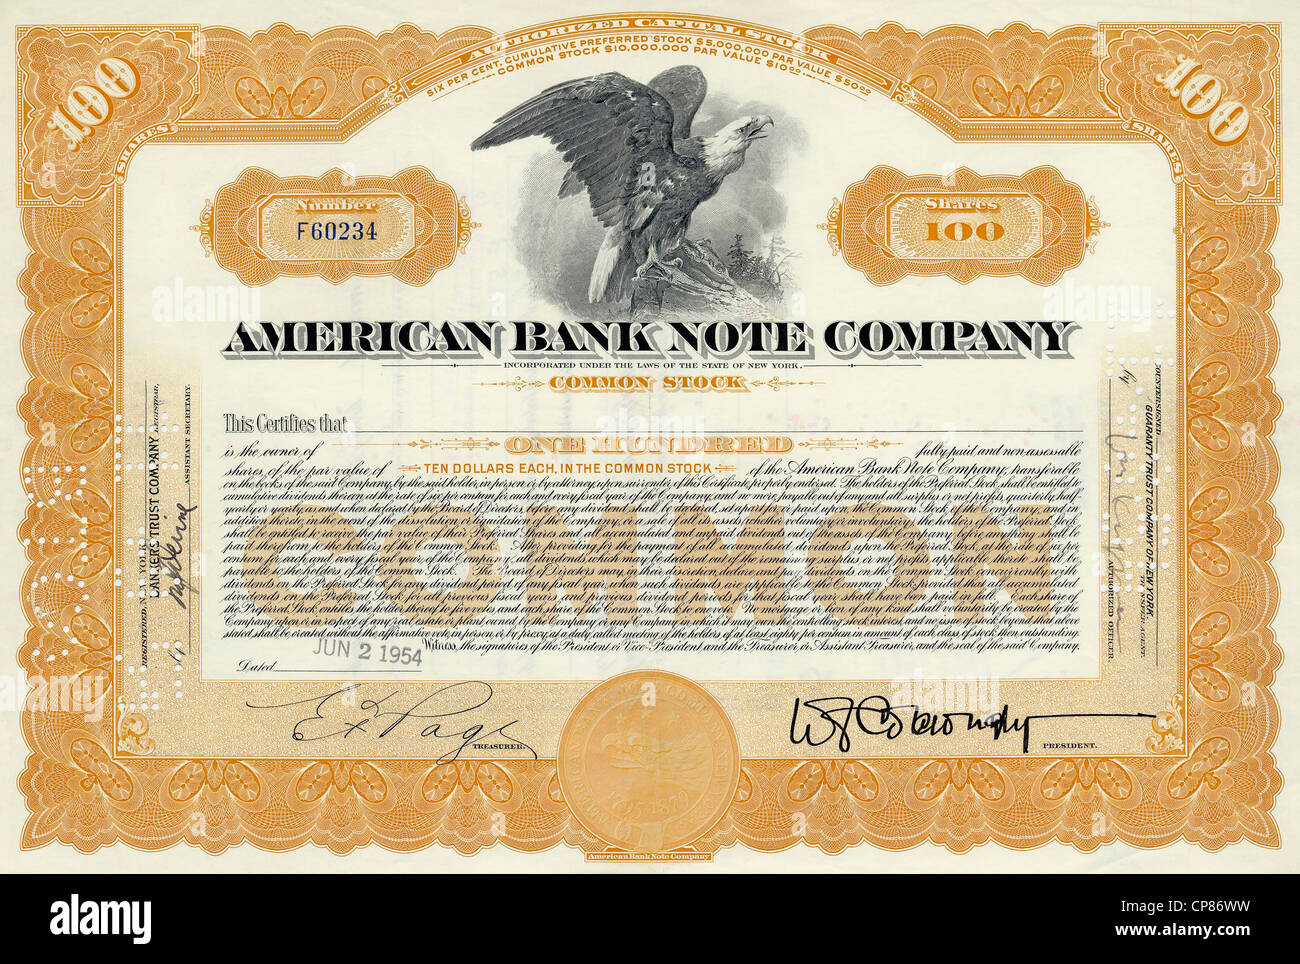 Historic share certificate, detail of the vignette, eagle, American Bank Note Company, ABNC, printing office for banknotes and s Stock Photo